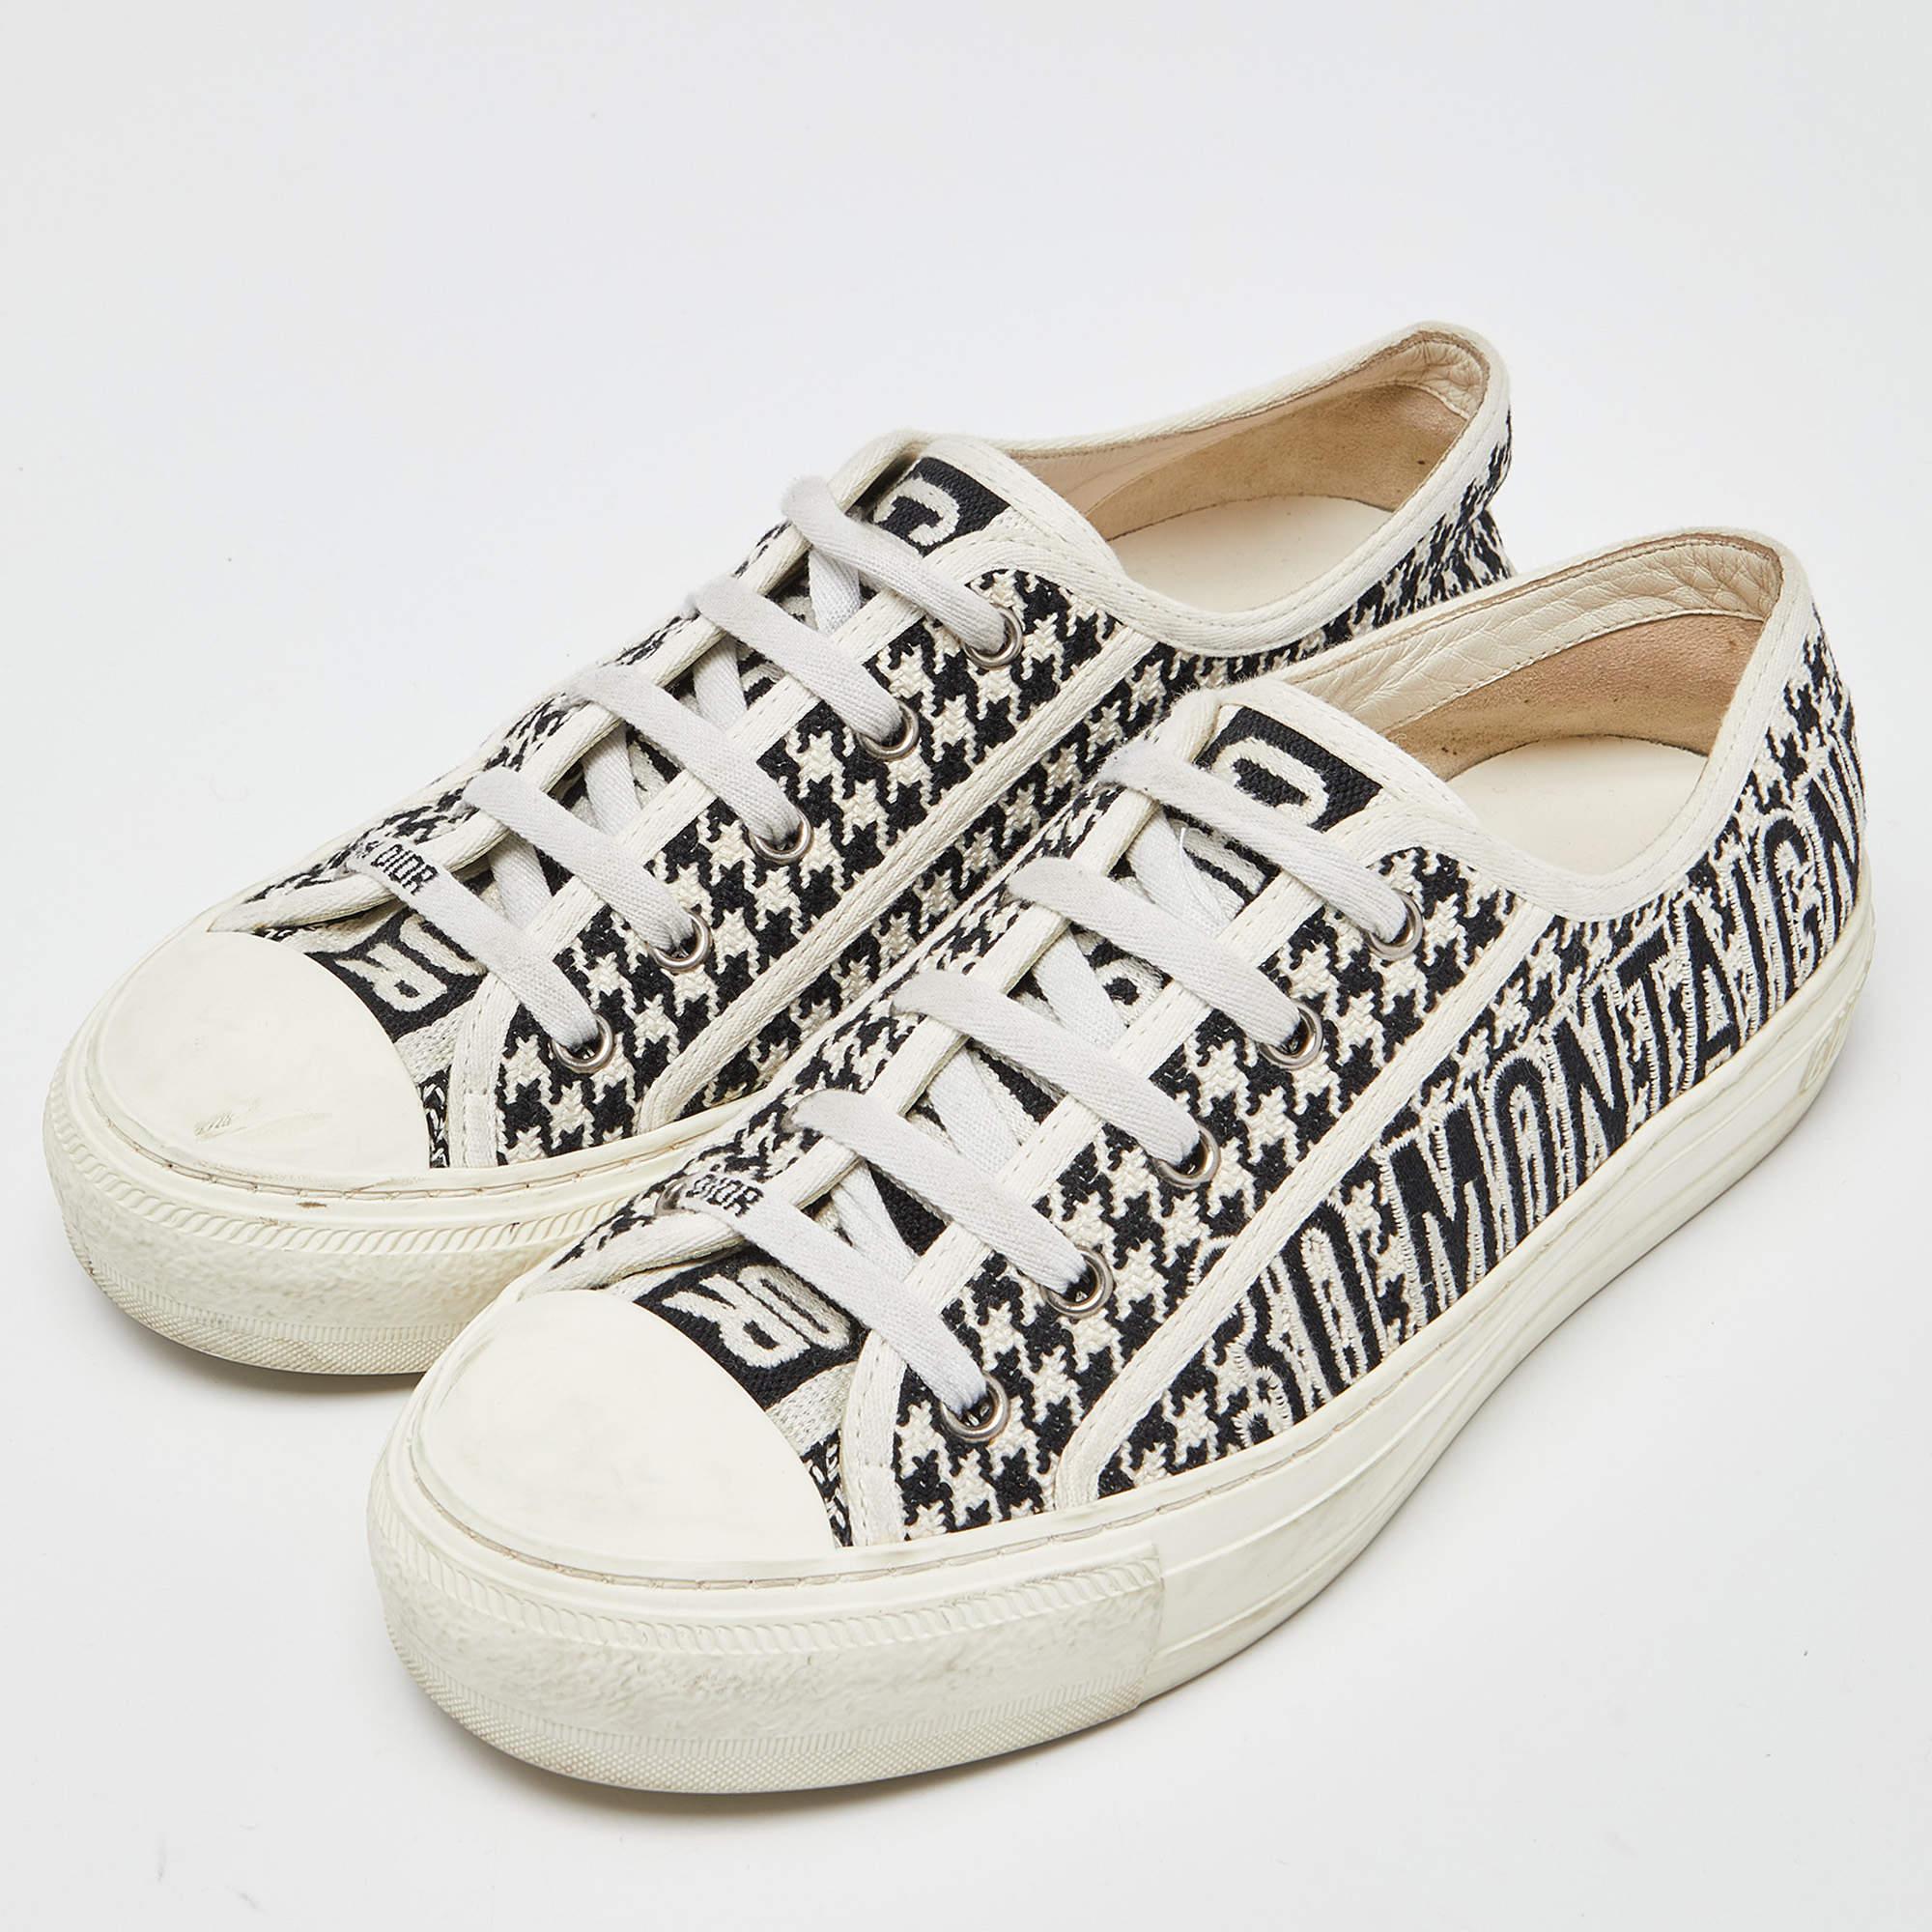 Add a statement appeal to your outfit with these Dior sneakers. Made from embroidered canvas, they feature lace-up vamps, a brand signature on the uppers, and comfortable insoles. The rubber sole of this pair aims to provide you with everyday ease.

